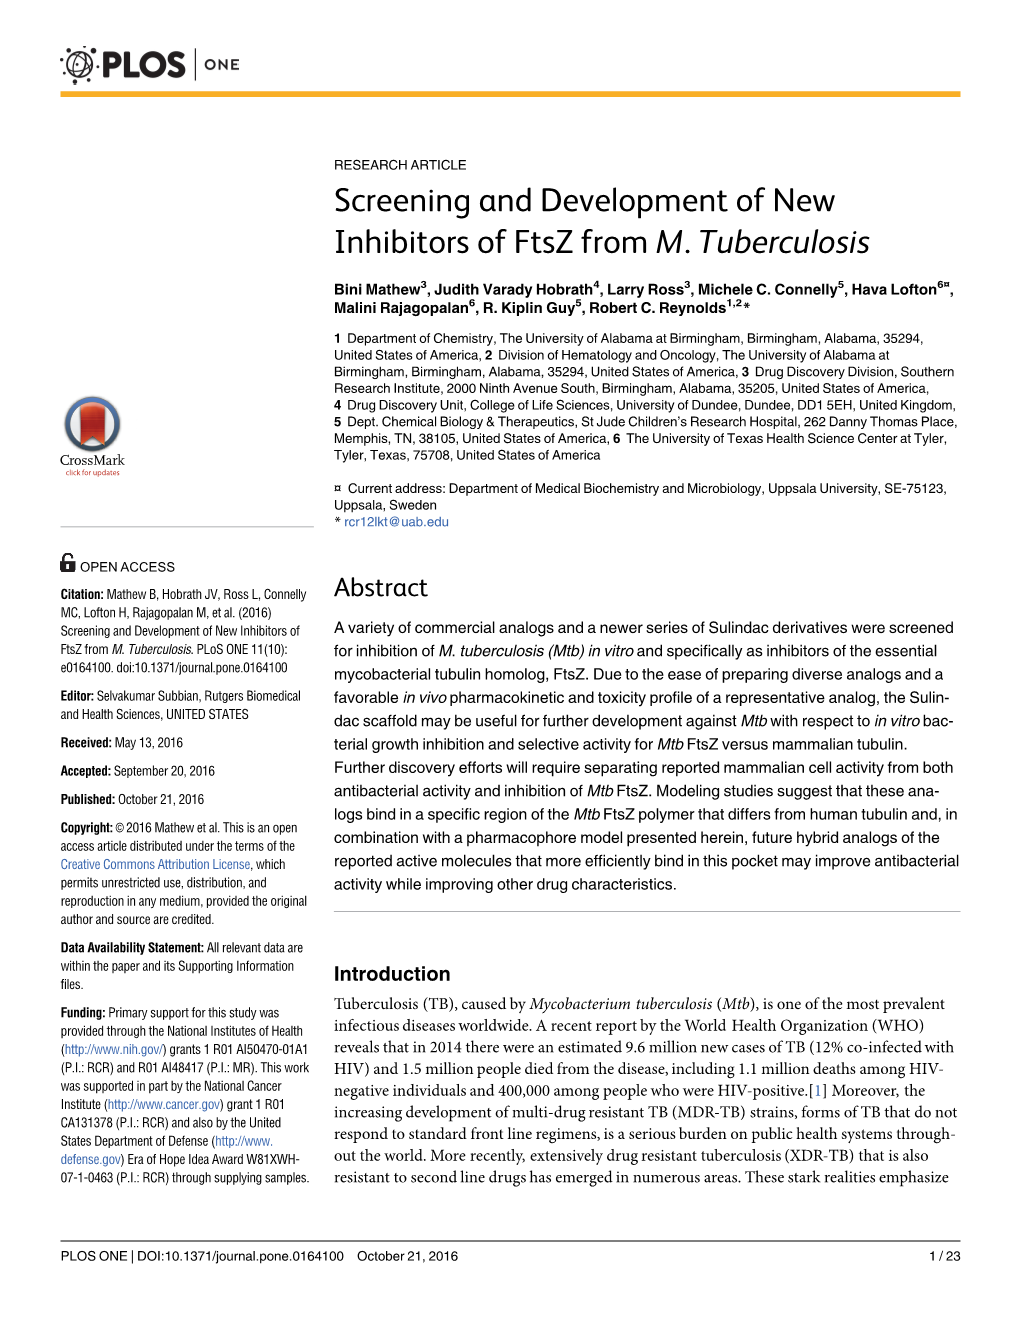 Screening and Development of New Inhibitors of Ftsz from M